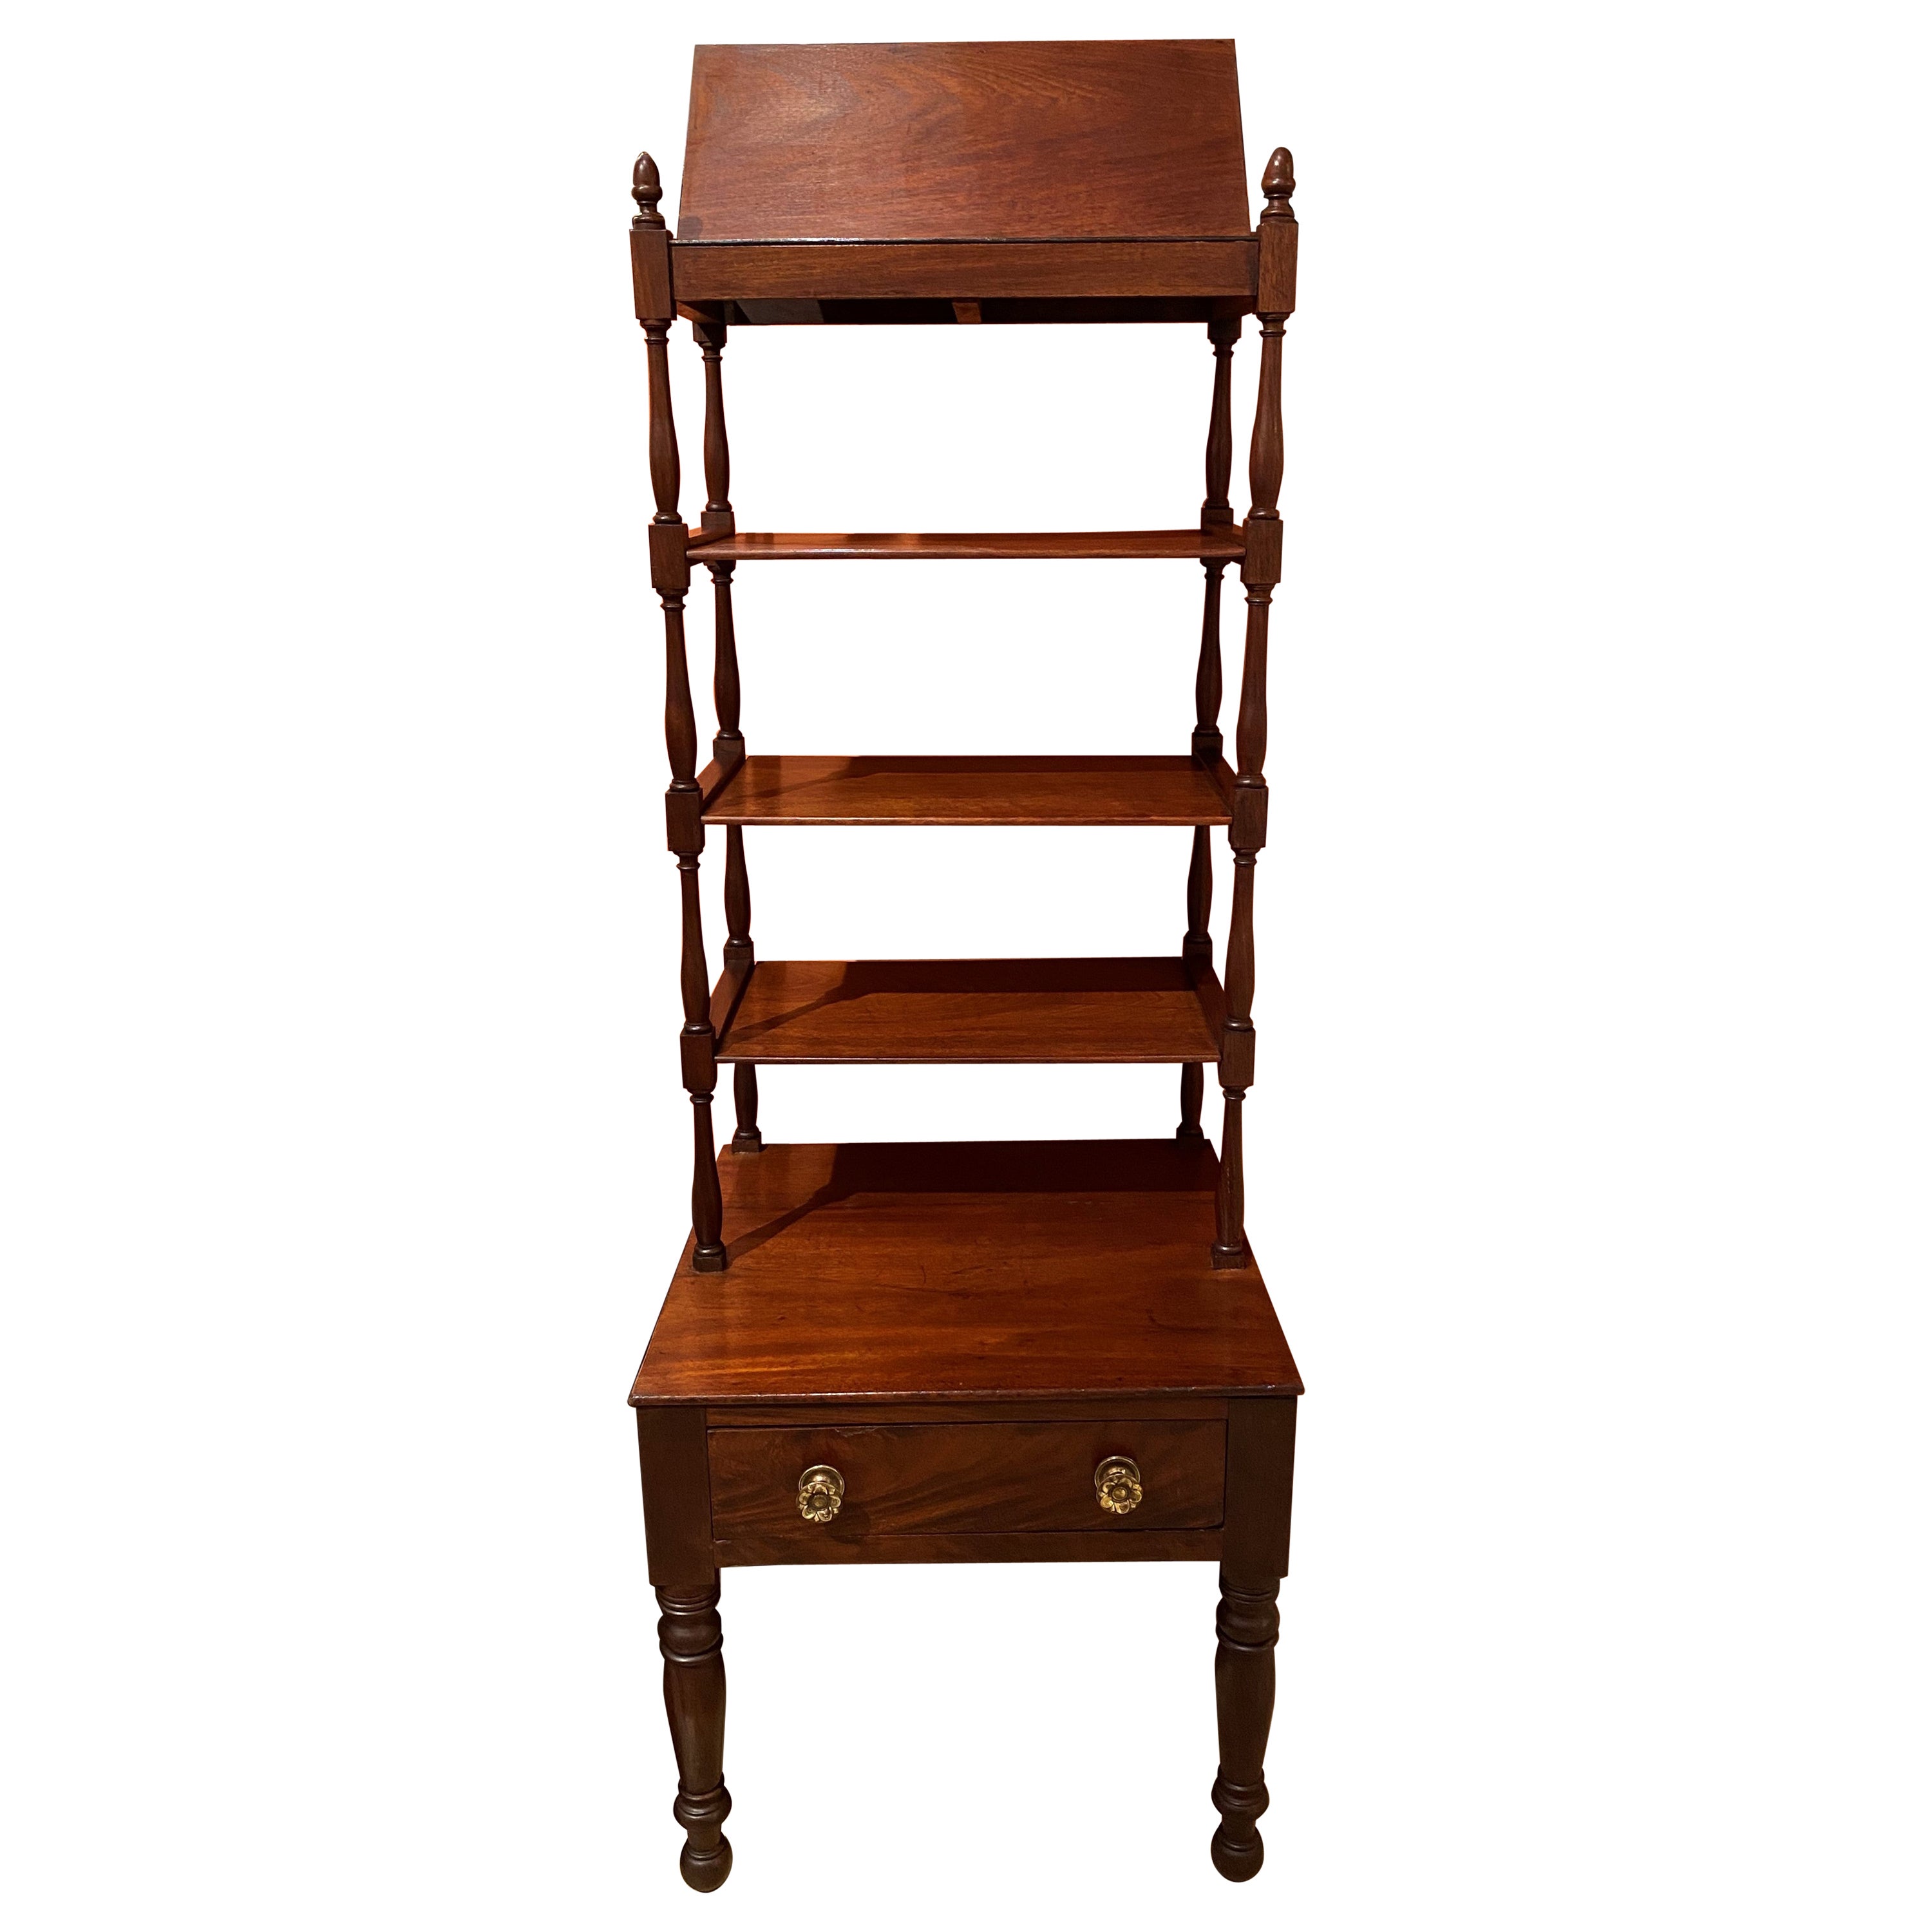 Rare 19th Century New York Mahogany One-Drawer Étagère with Four Shelves For Sale